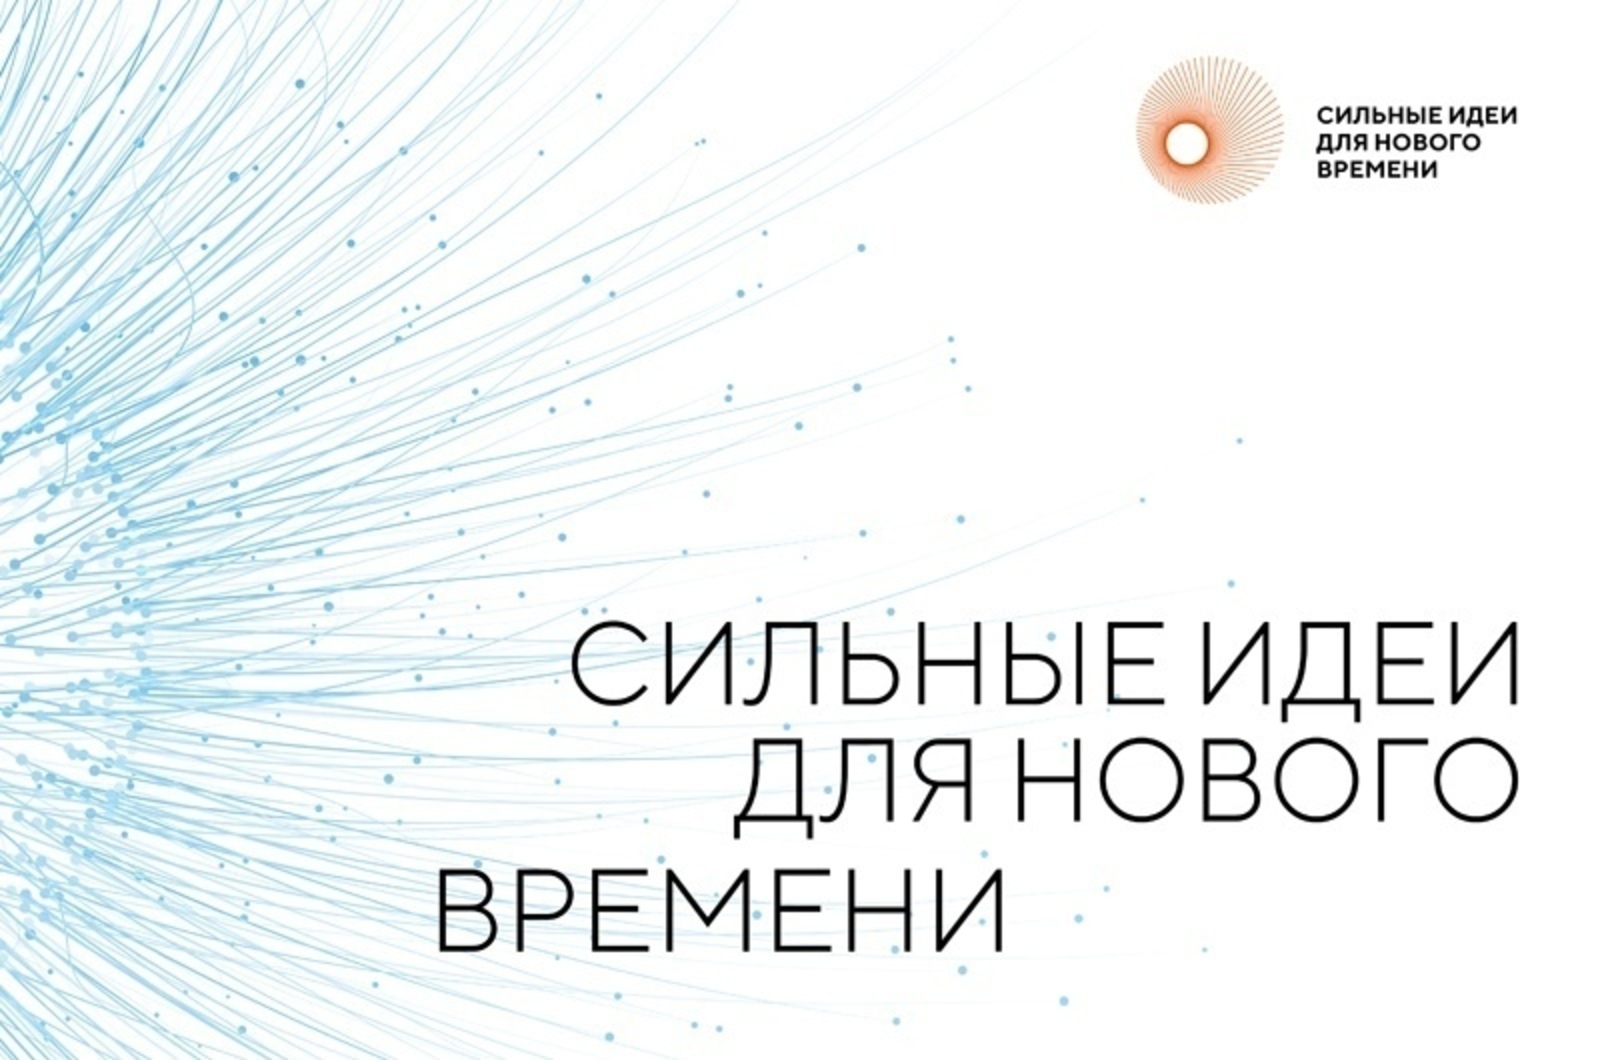 ASI and the Ros Congress Foundation accept applications for the competition of promising Russian brands